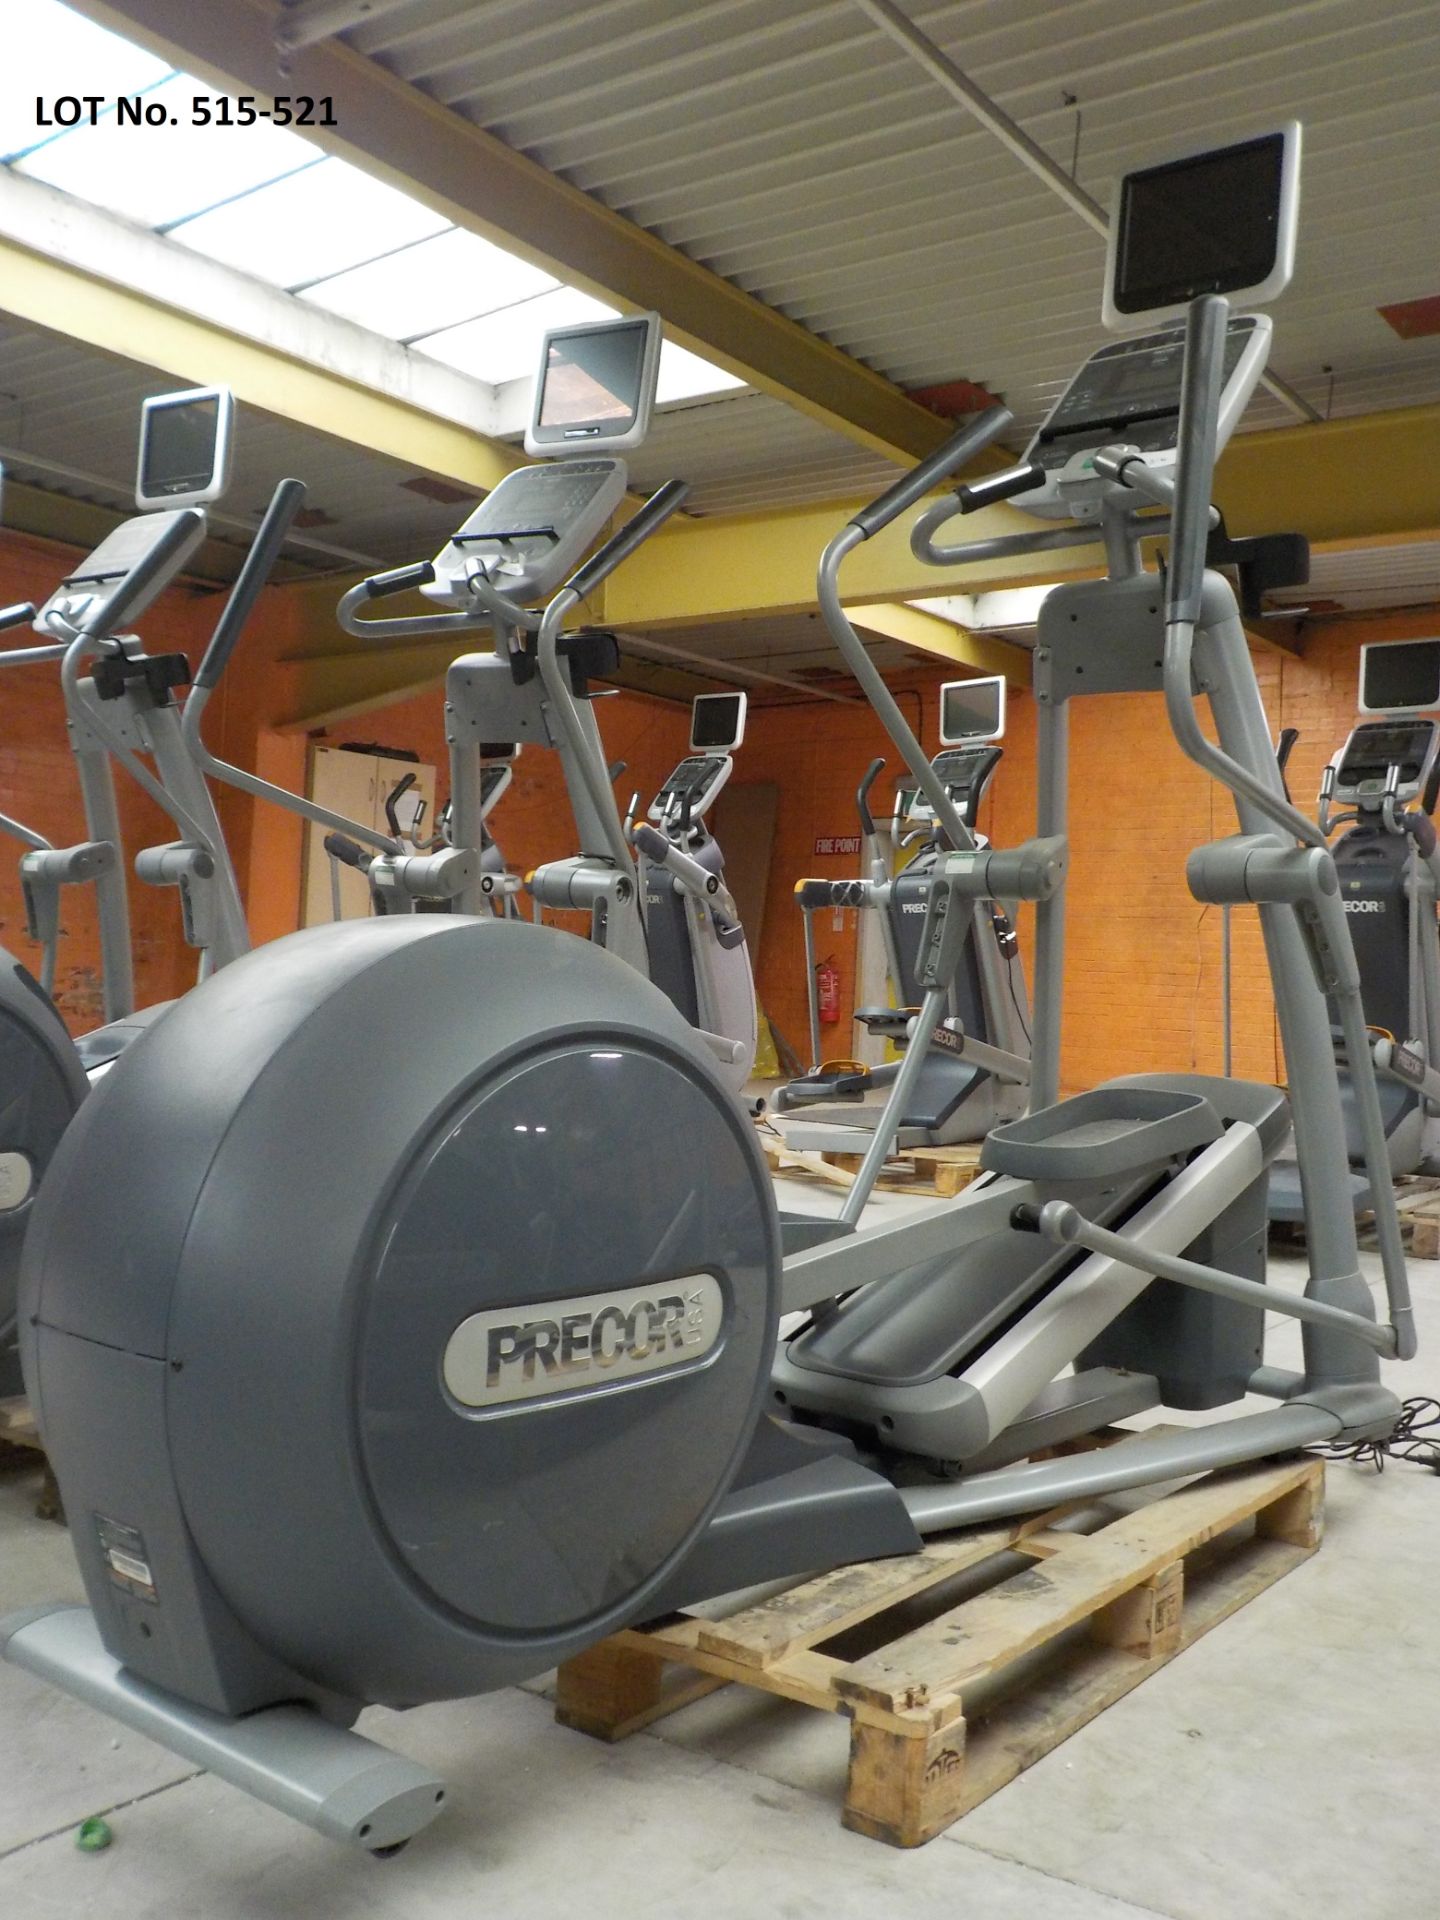 PRECOR ELLIPTICAL - EFX576i (WITH TV) serial number AXGEK17090005 *PLEASE NOTE - this lot is to be